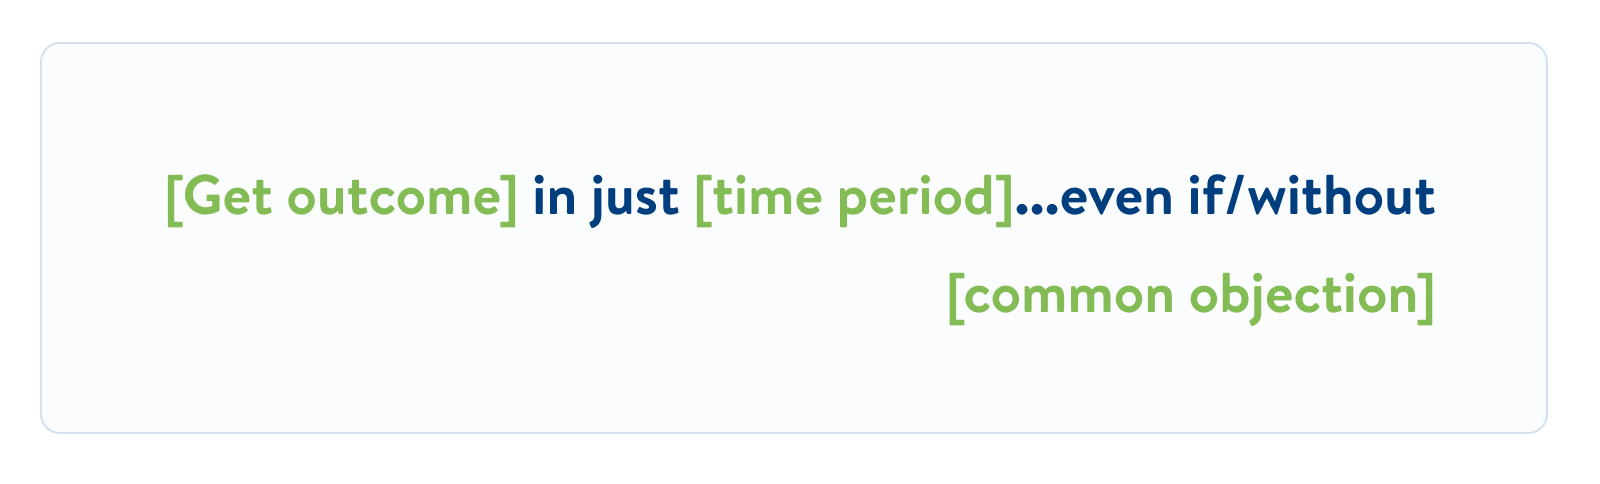 [Get outcome] in just [time period]... even if/without [common objection].